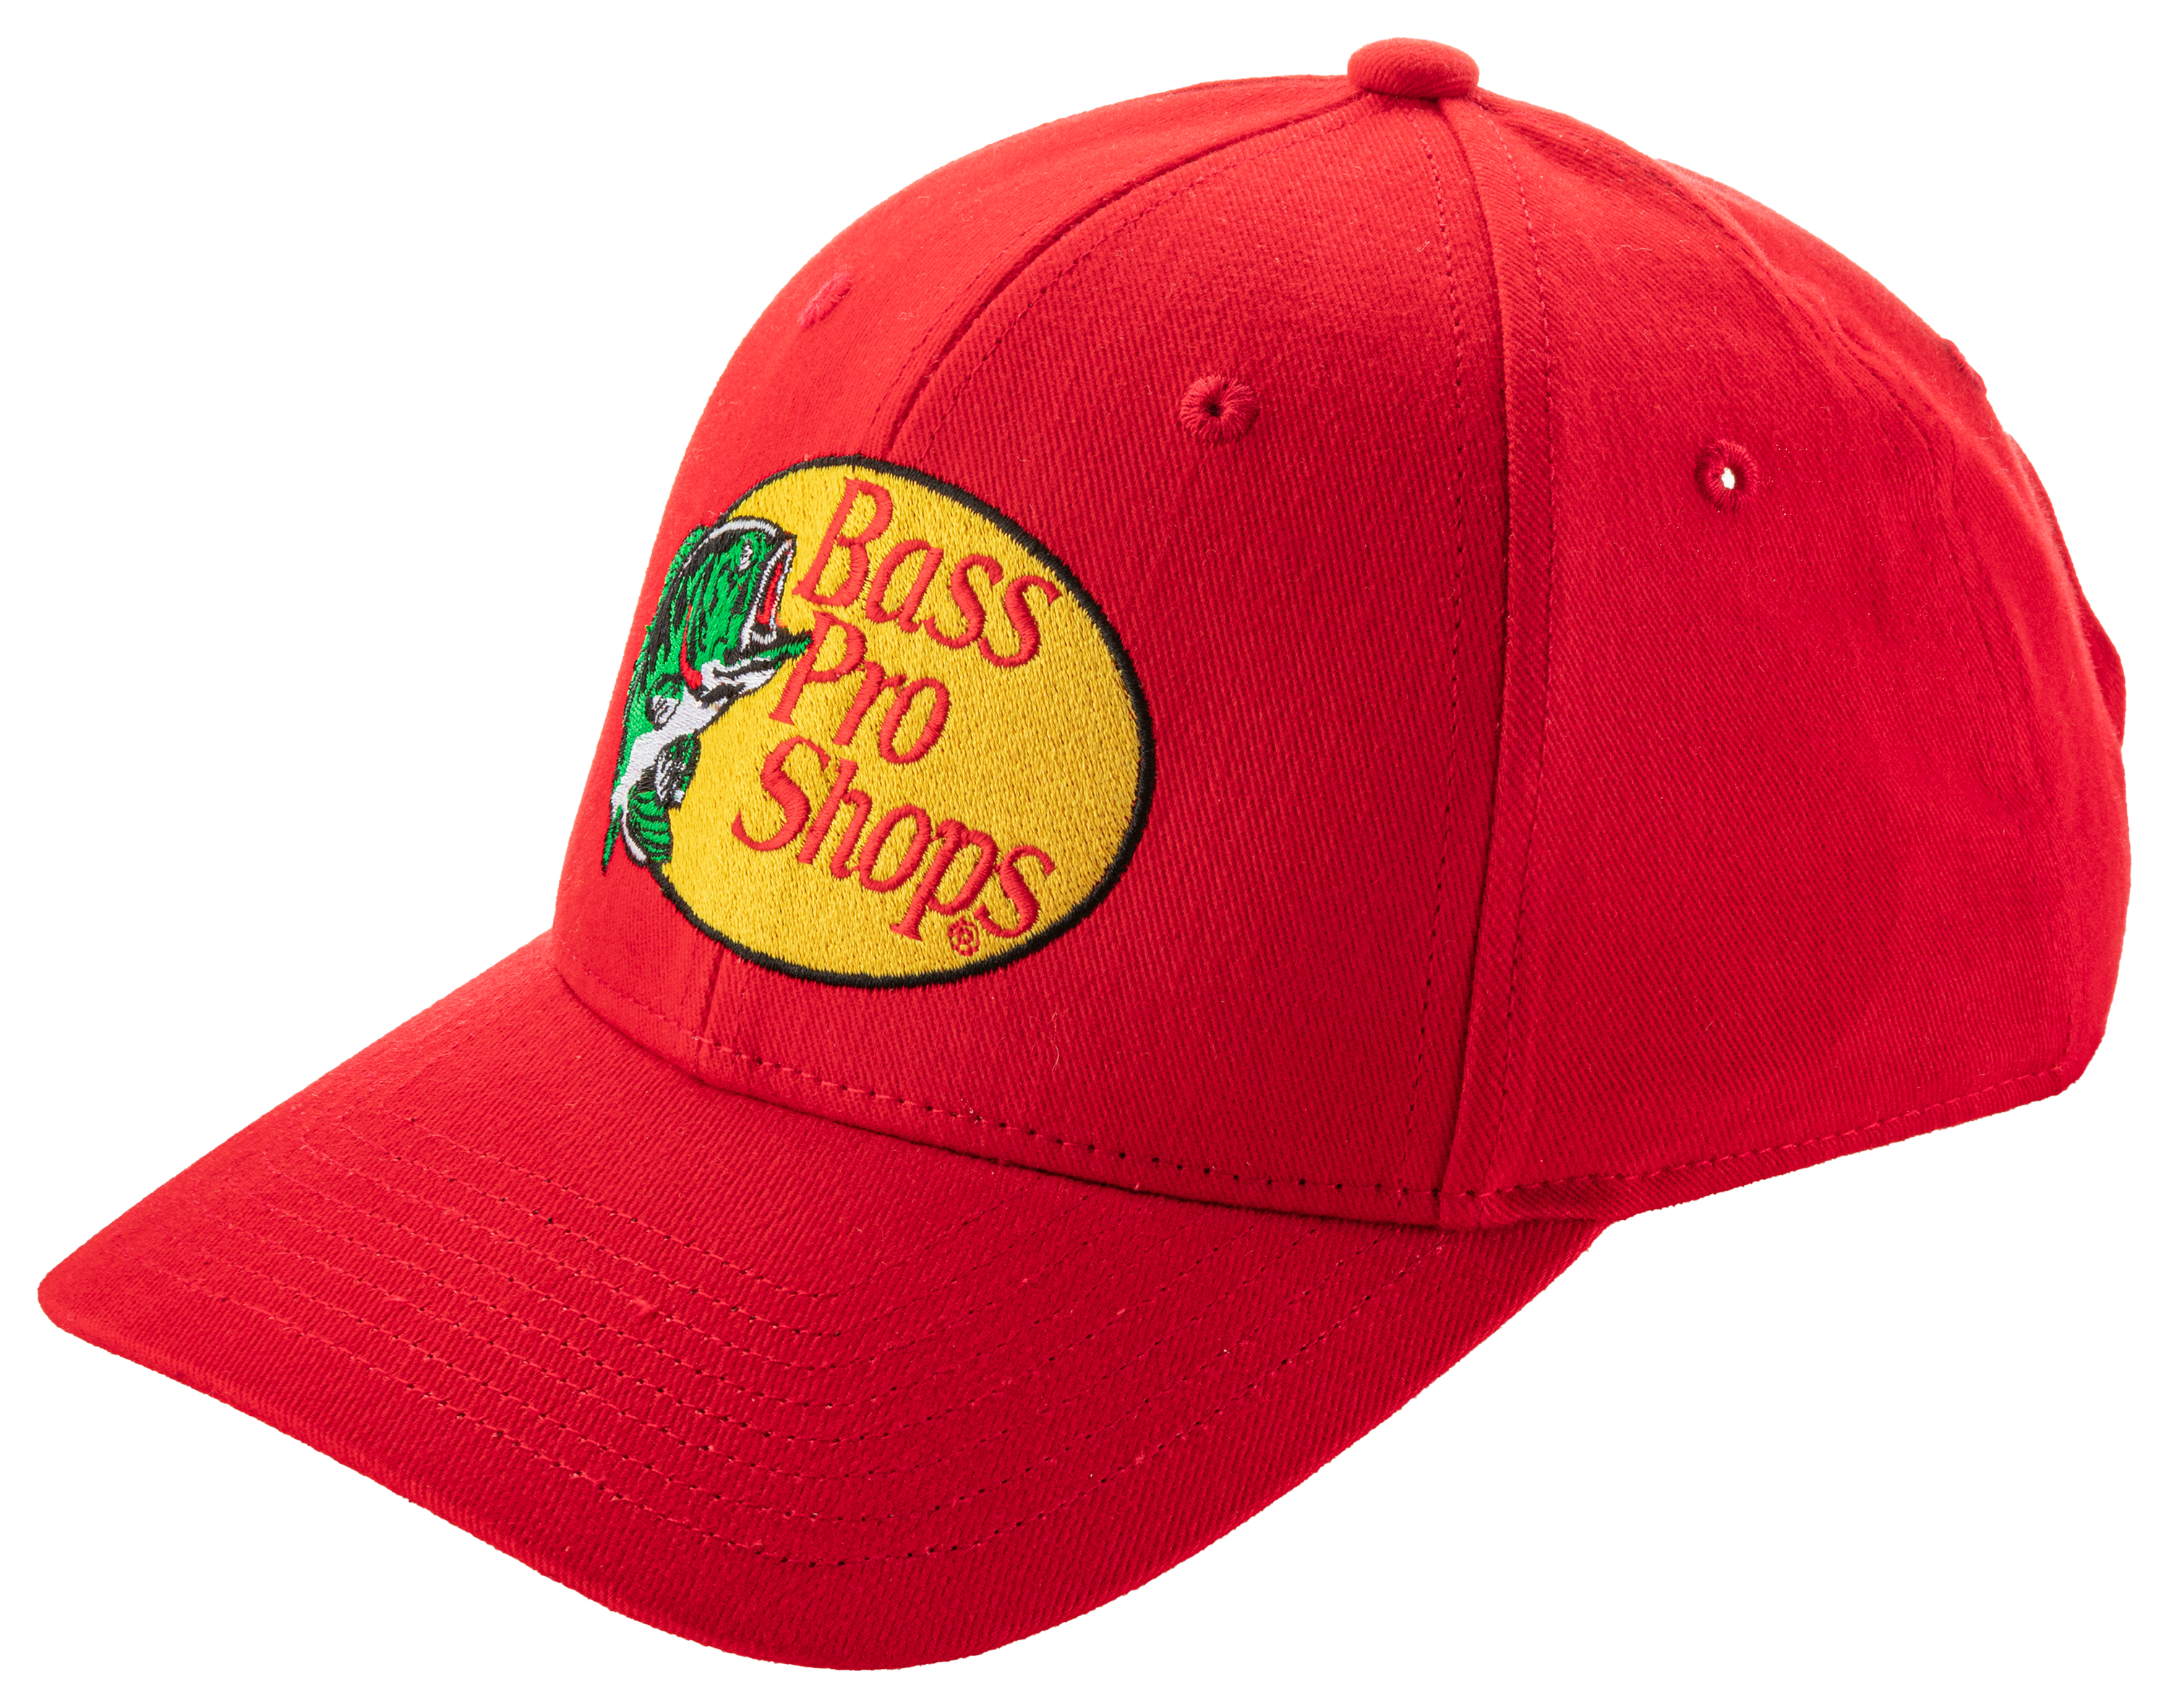 Bass Pro Shops, Accessories, Bass Pro Shops Embroidered Fishing Cap